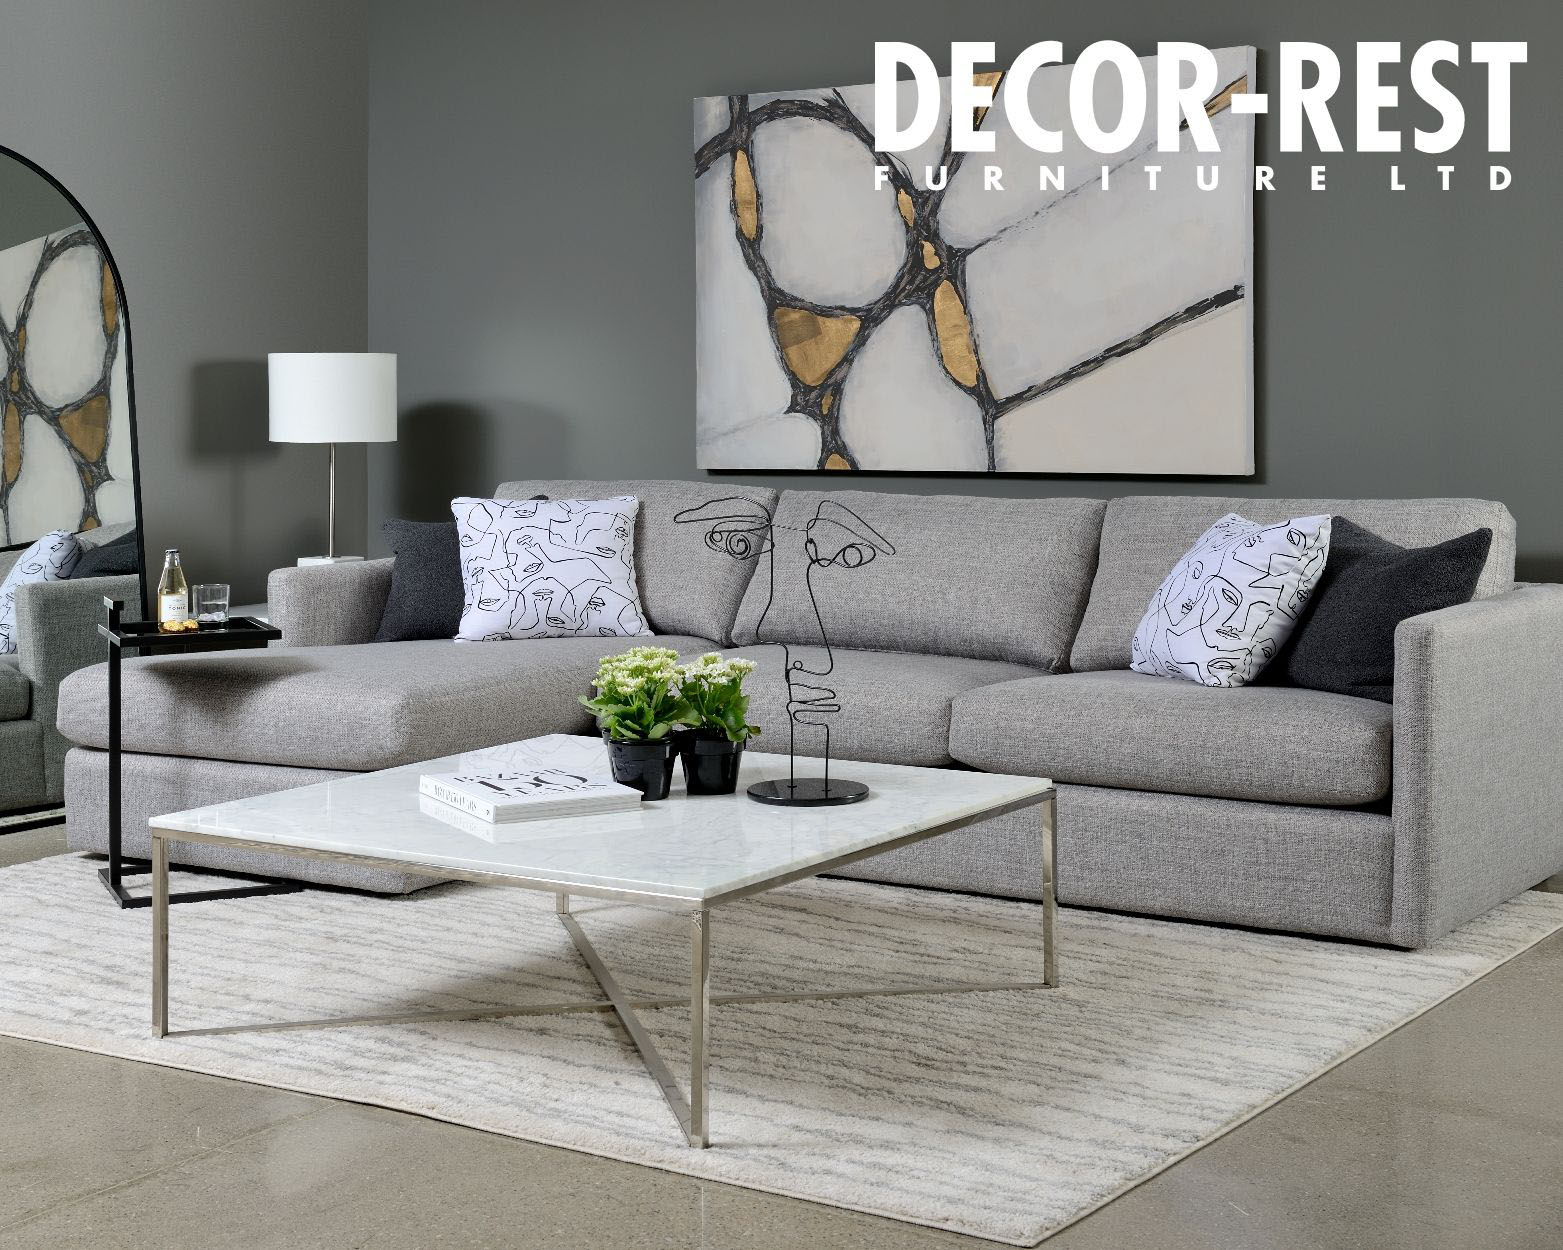 Home Décor Shopping | Home Furnishings & Accessories | D'Décor